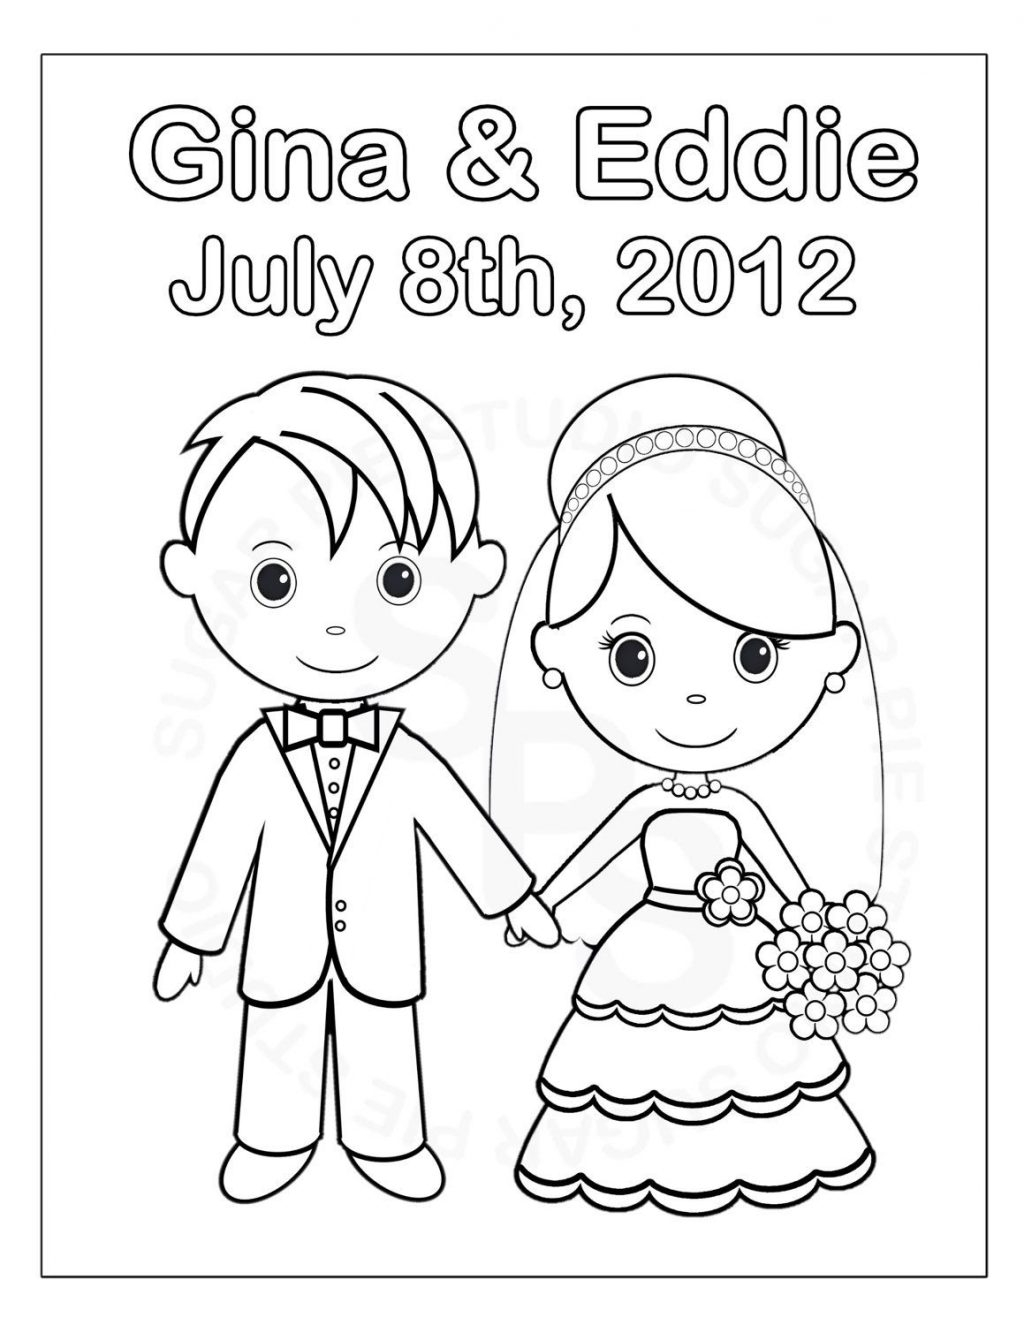 Personalized Coloring Pages Coloring Pages Personalized Printable Bride Groom Wedding Party